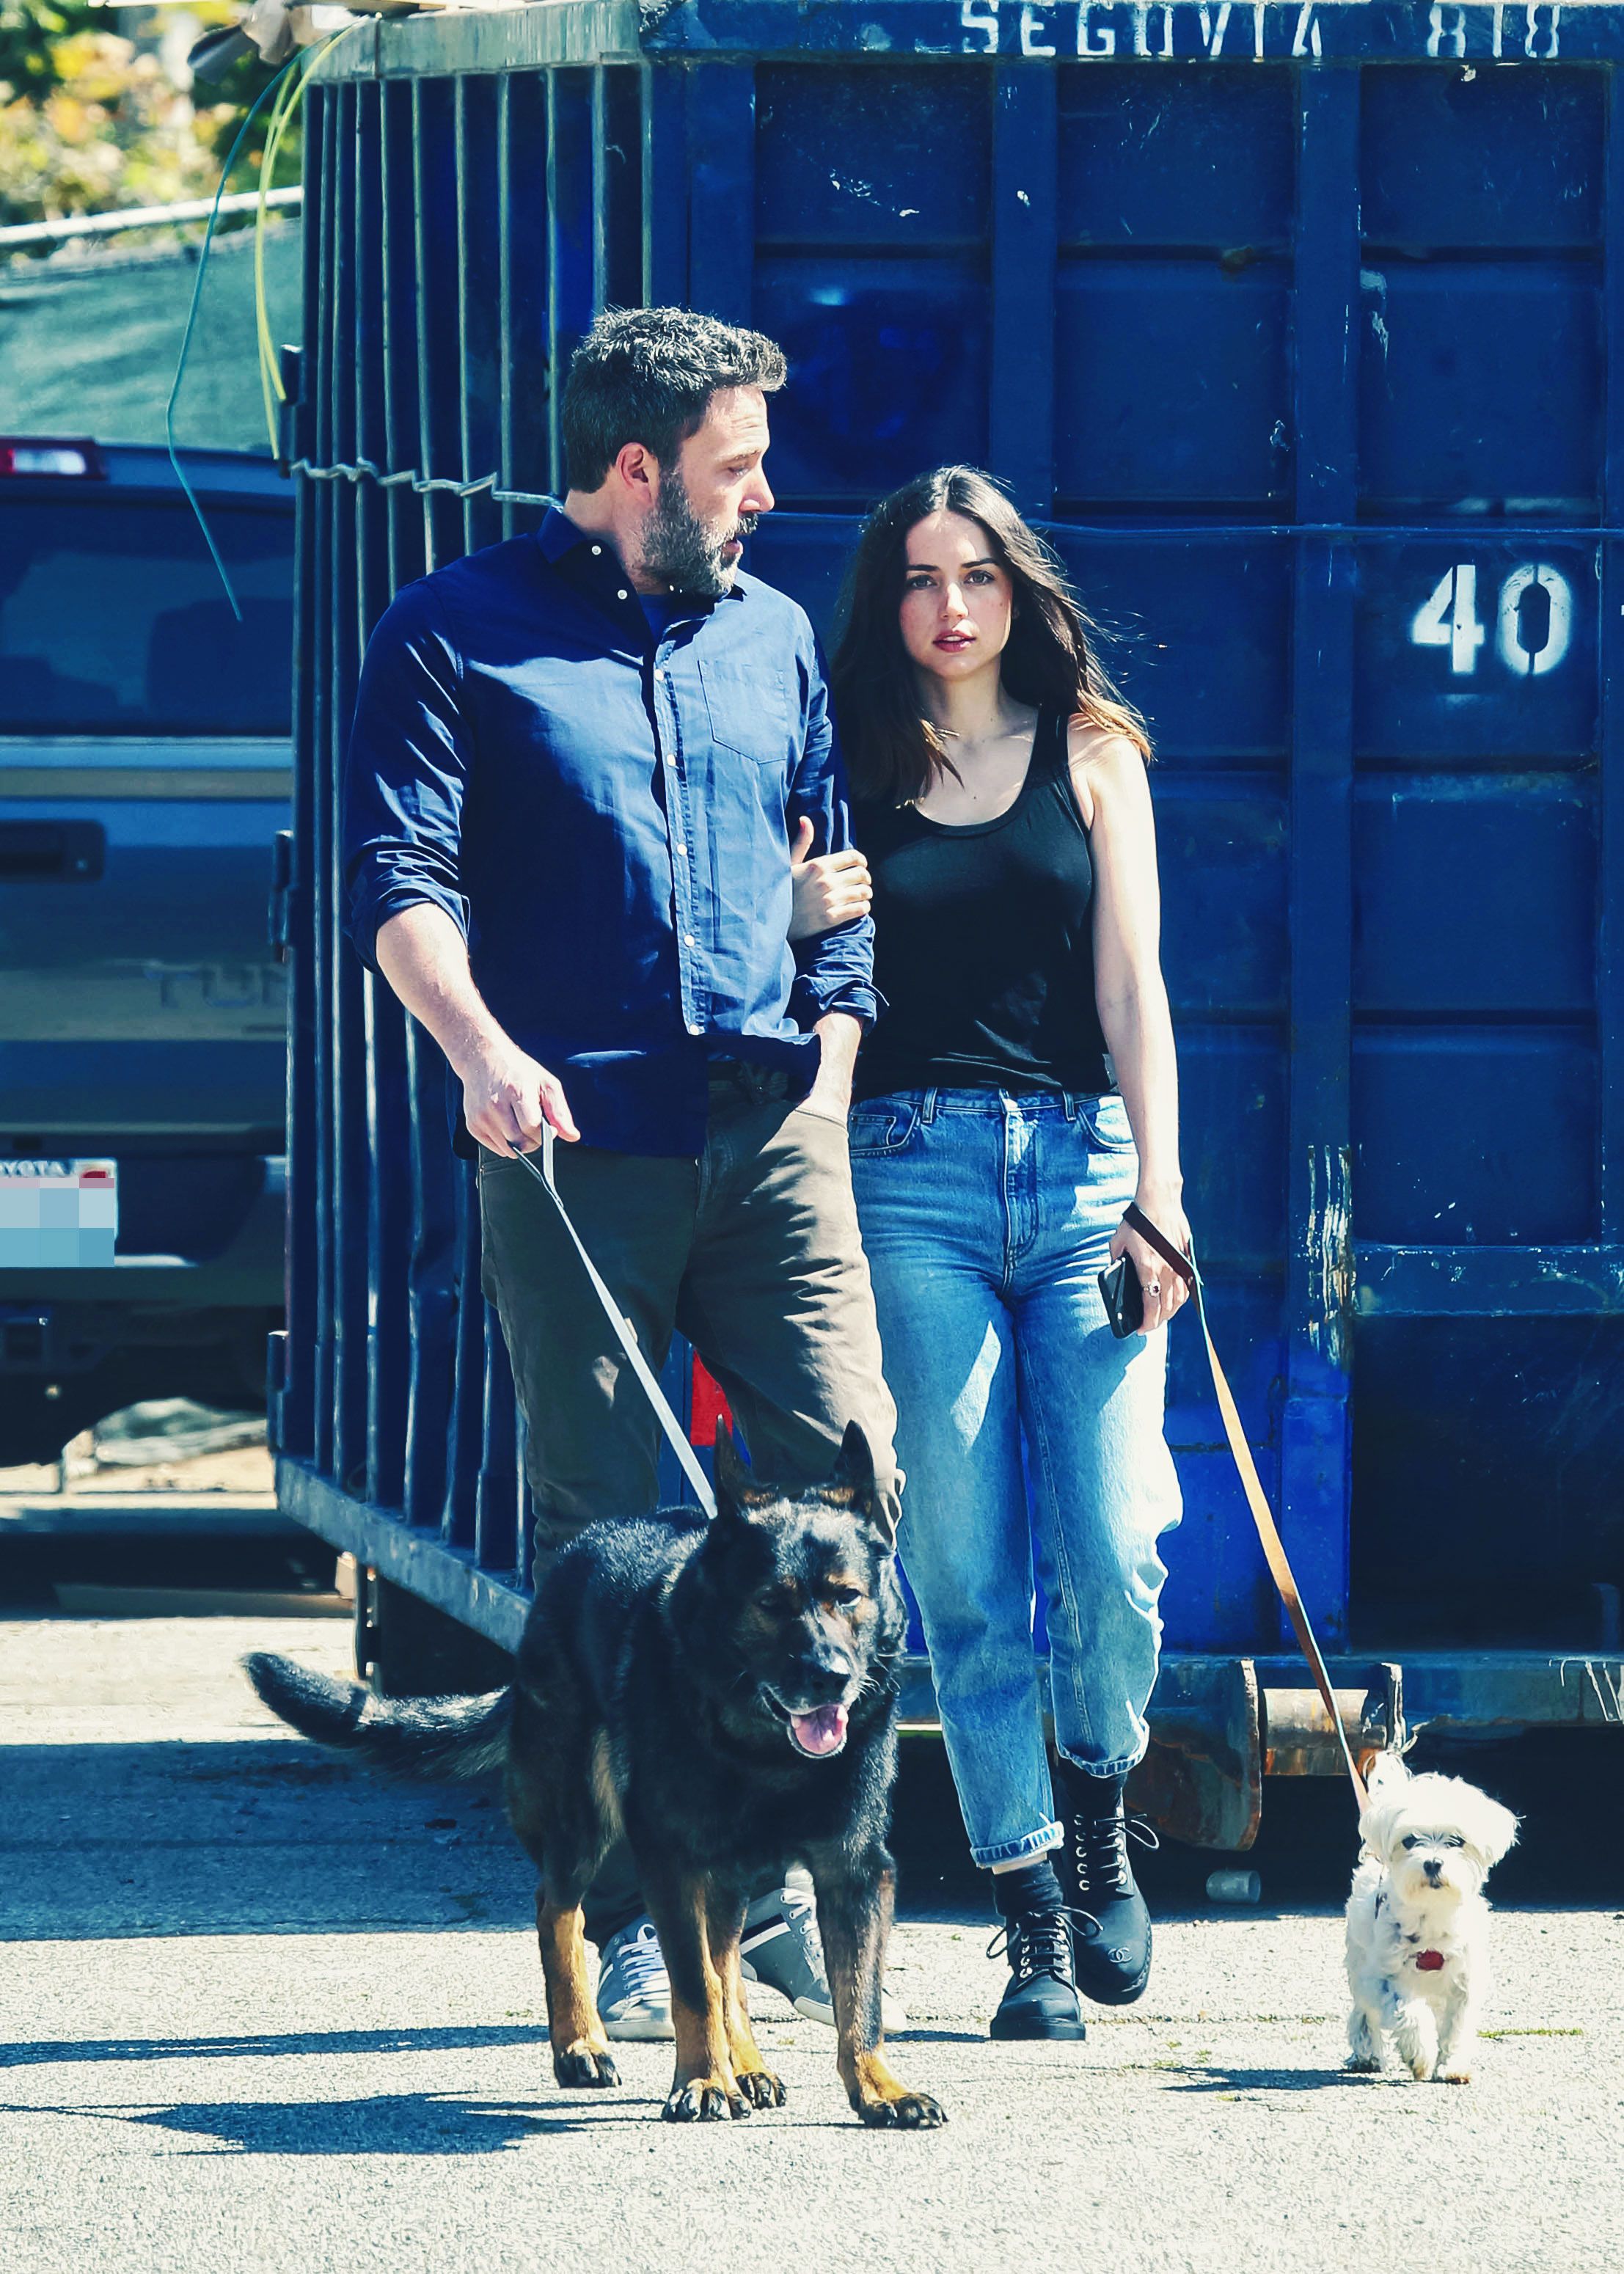 Why Did Ben Affleck and Ana de Armas Split? What Went Wrong